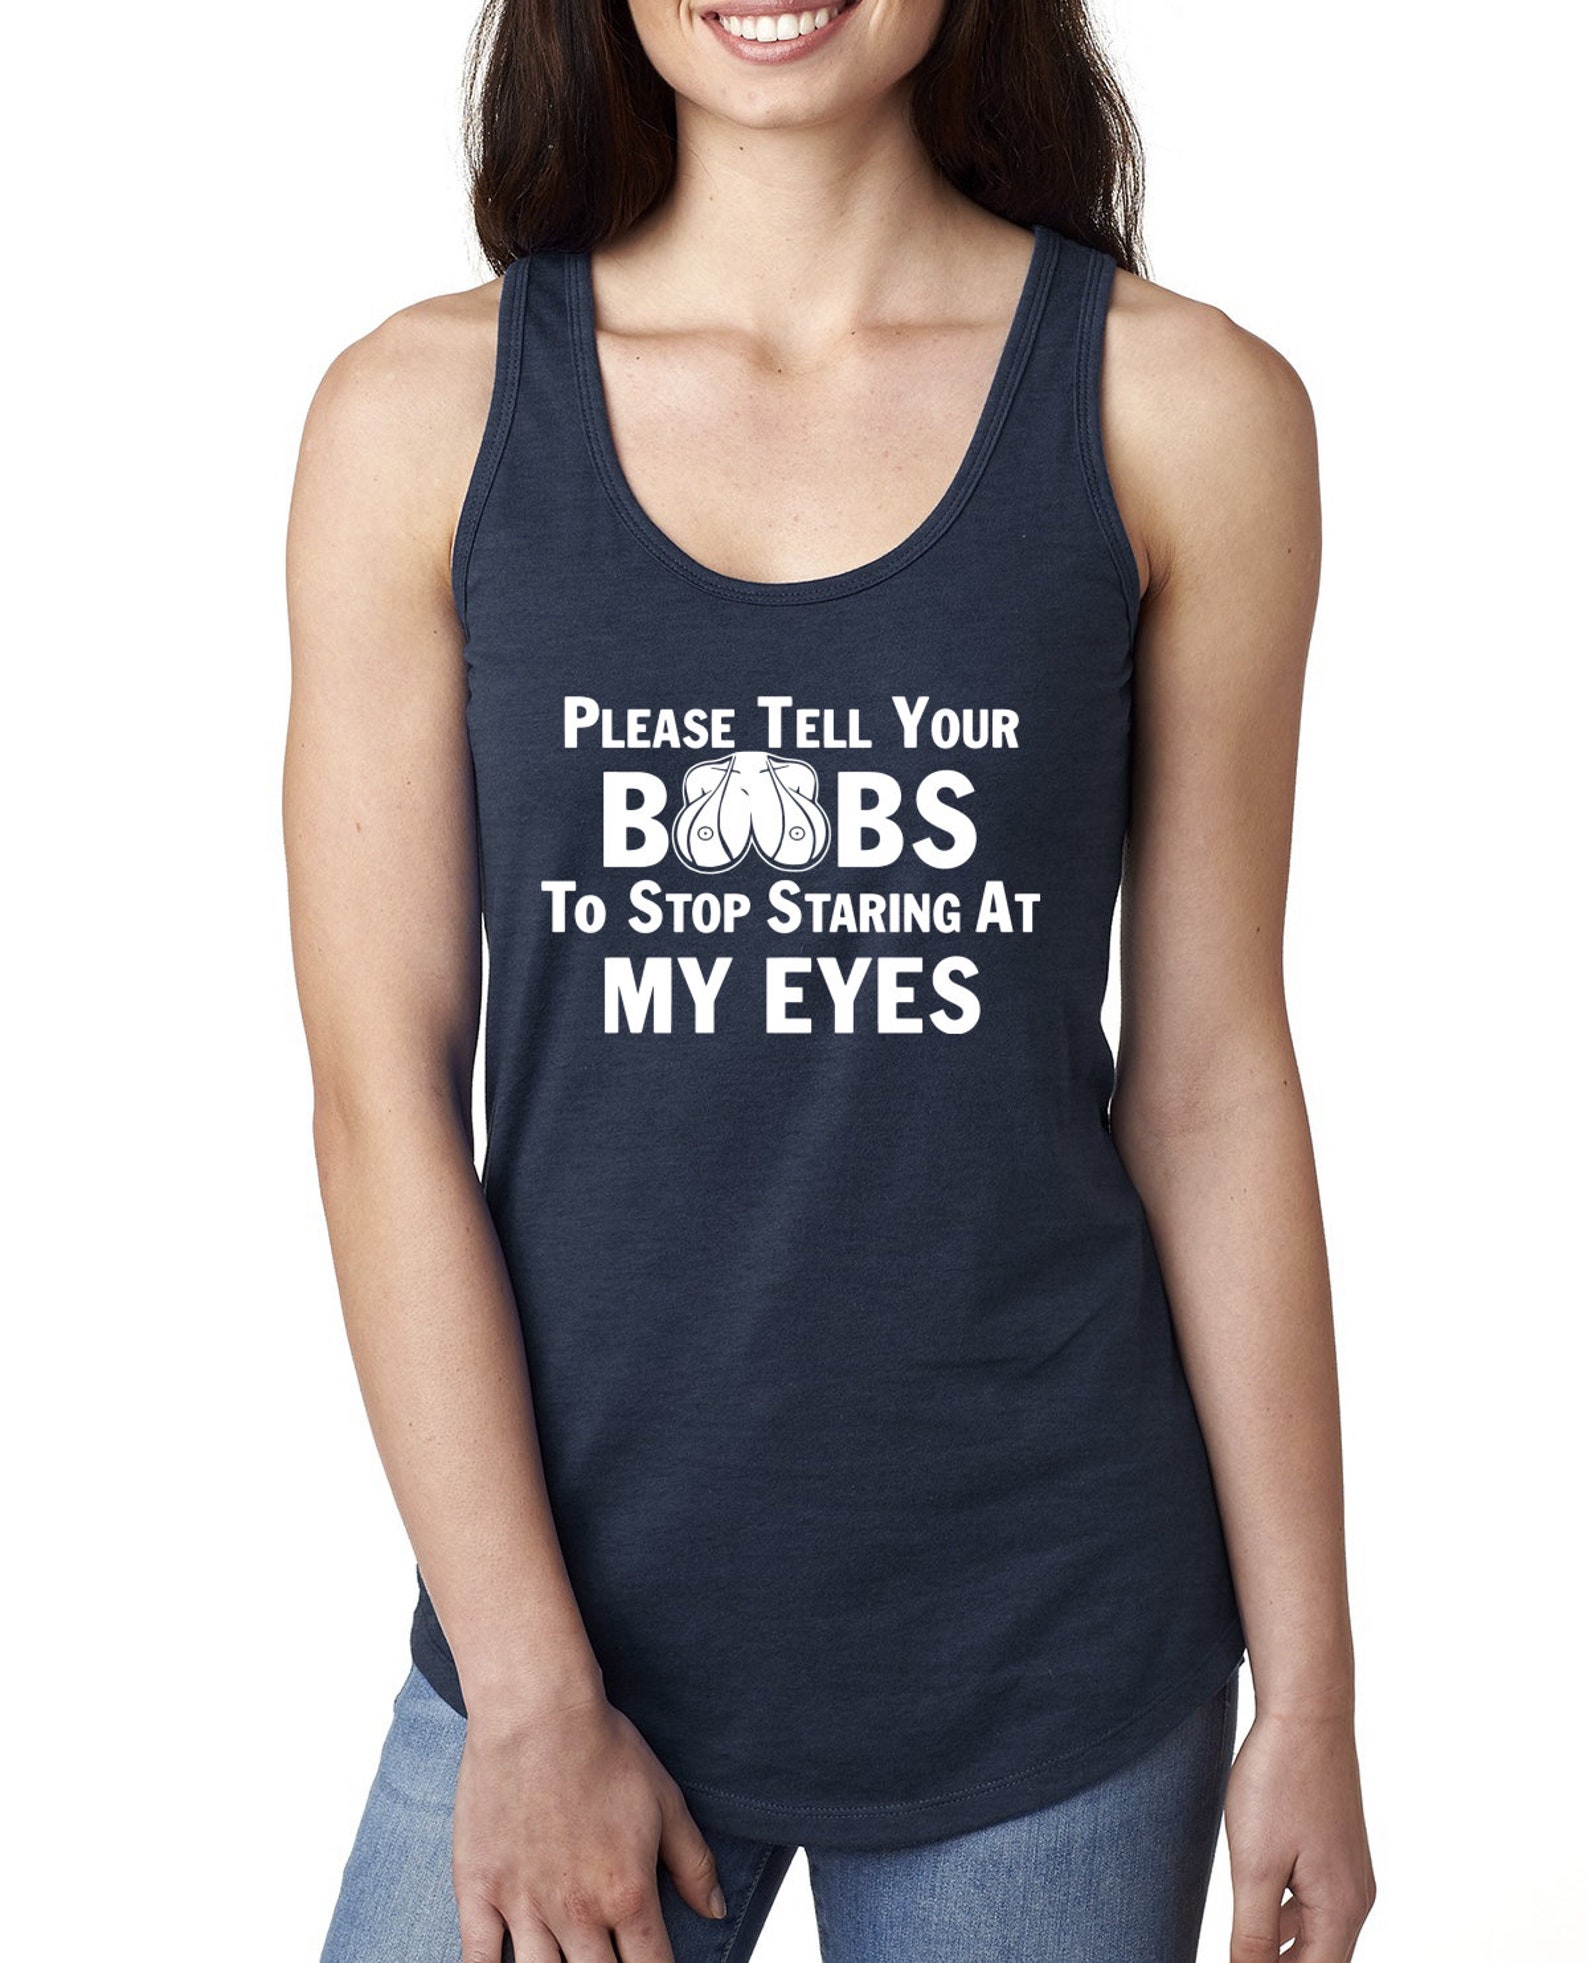 Please Tell Your Boobs To Stop Staring At My Eyes Humor Ladies Etsy